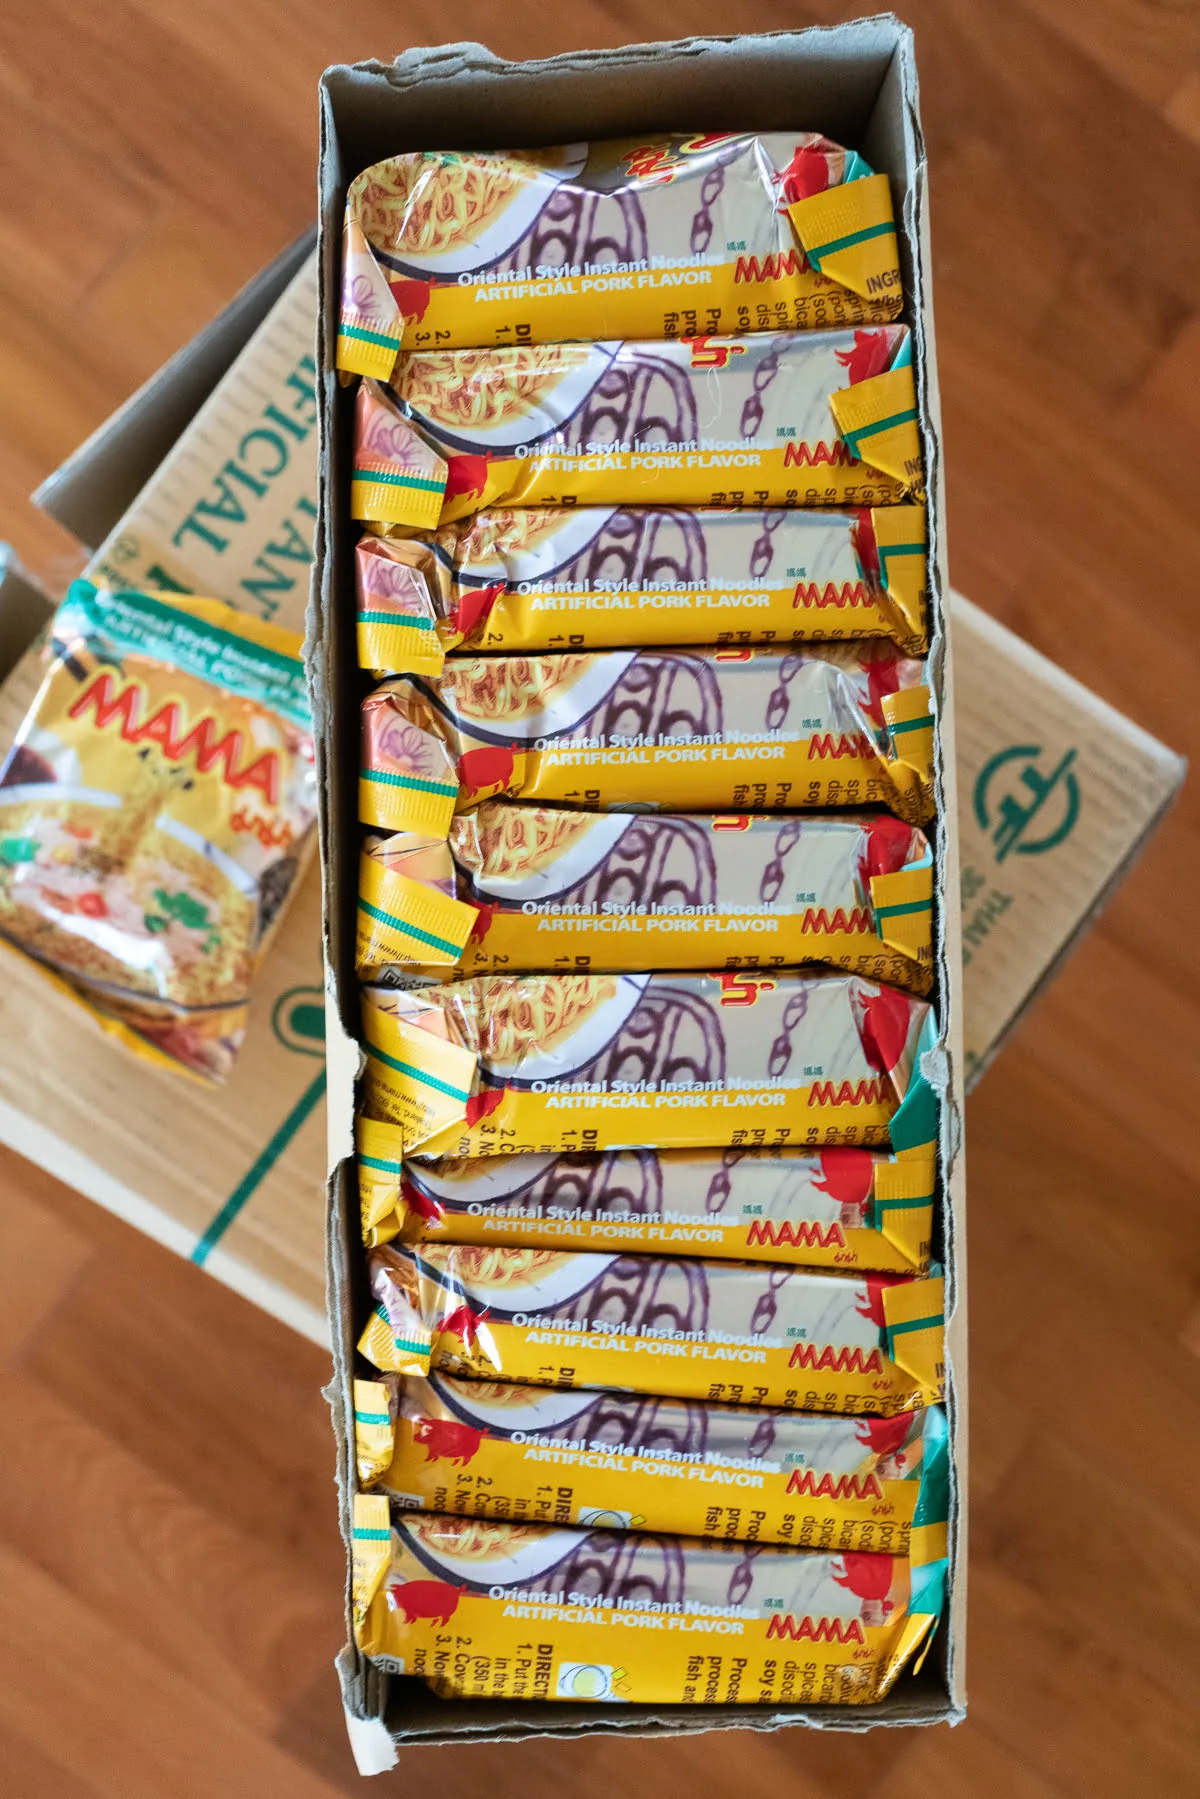 Many packages of Mama noodles.